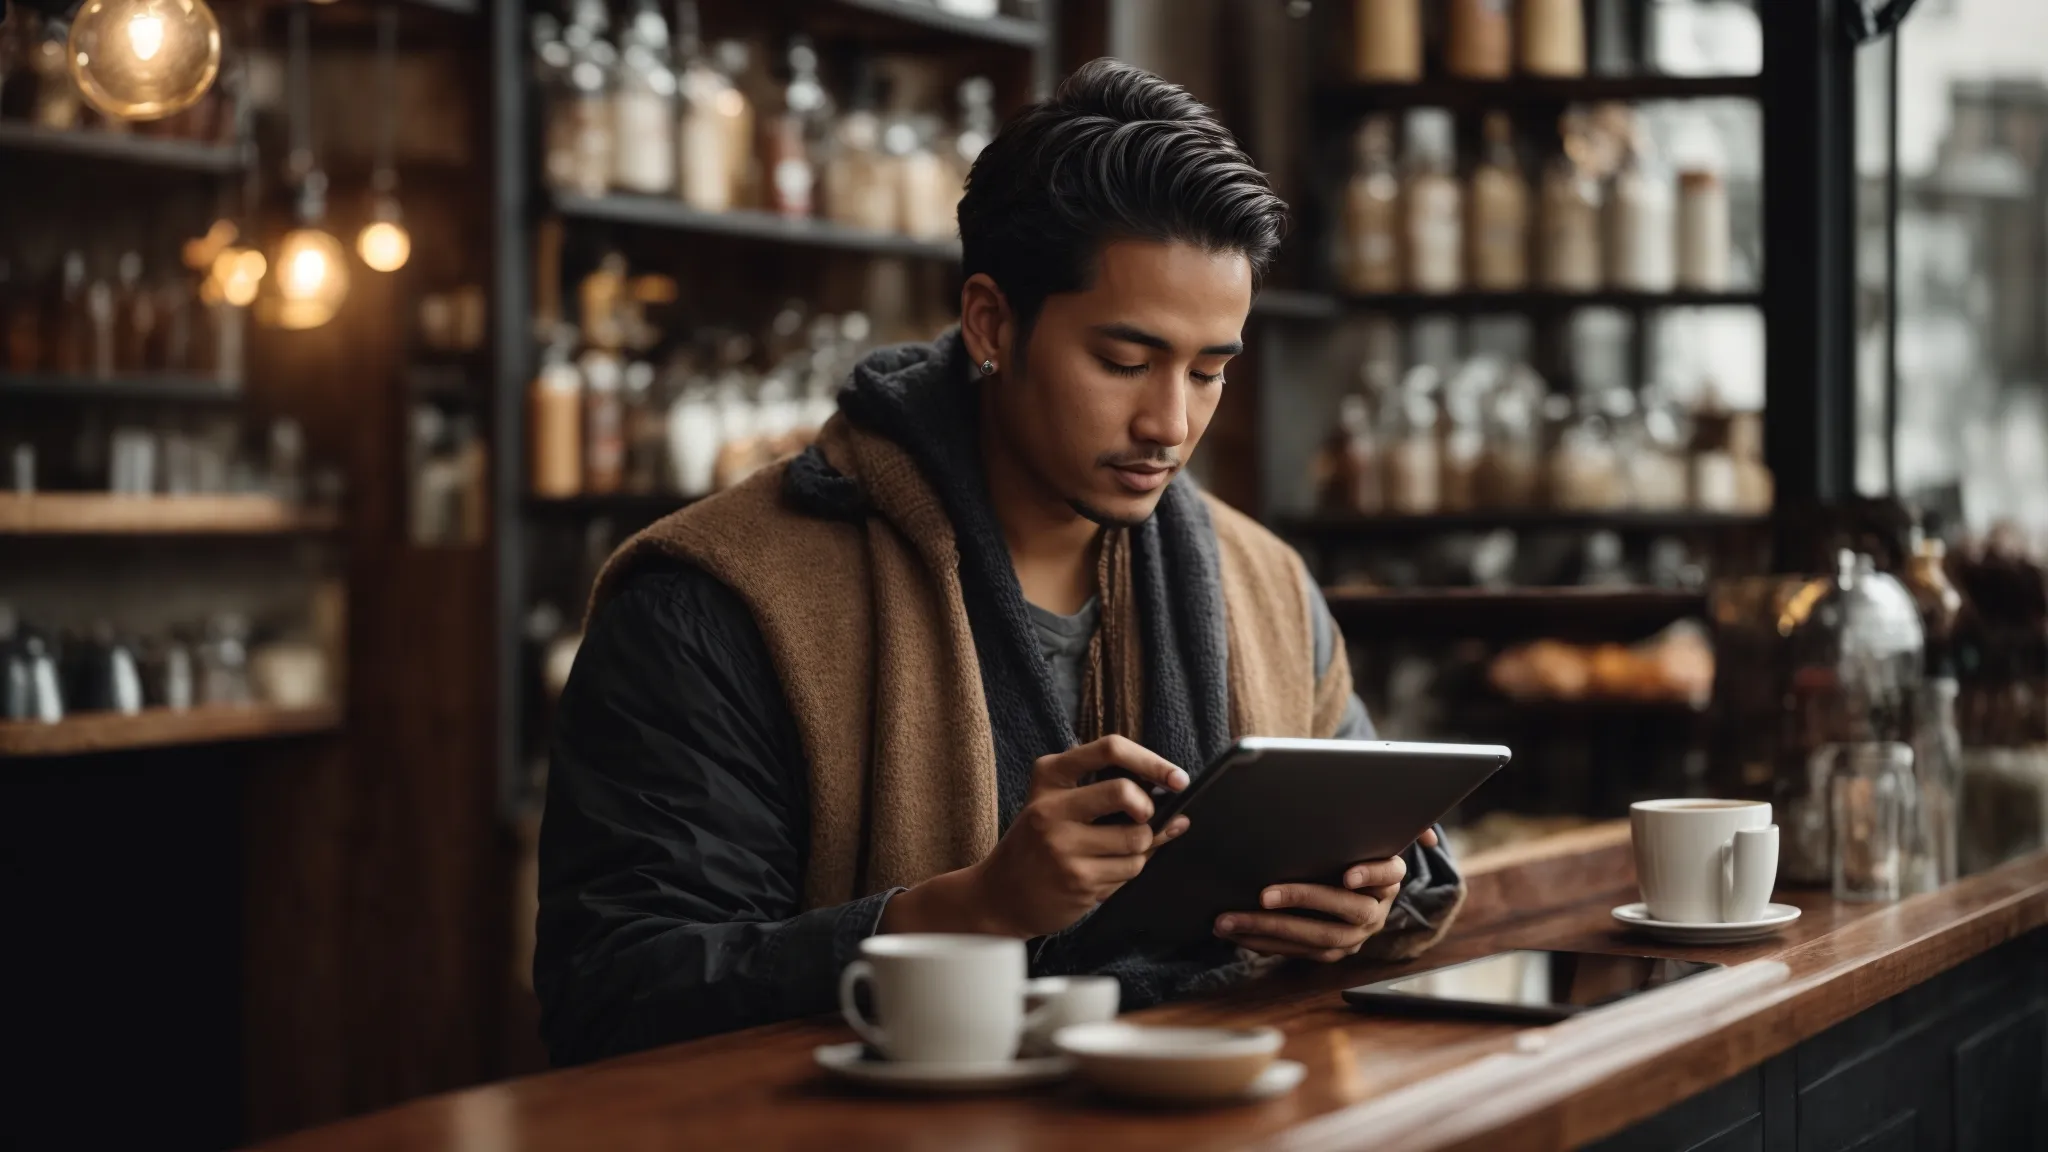 a shop owner updates their digital business profile on a tablet inside a cozy, well-lit café.